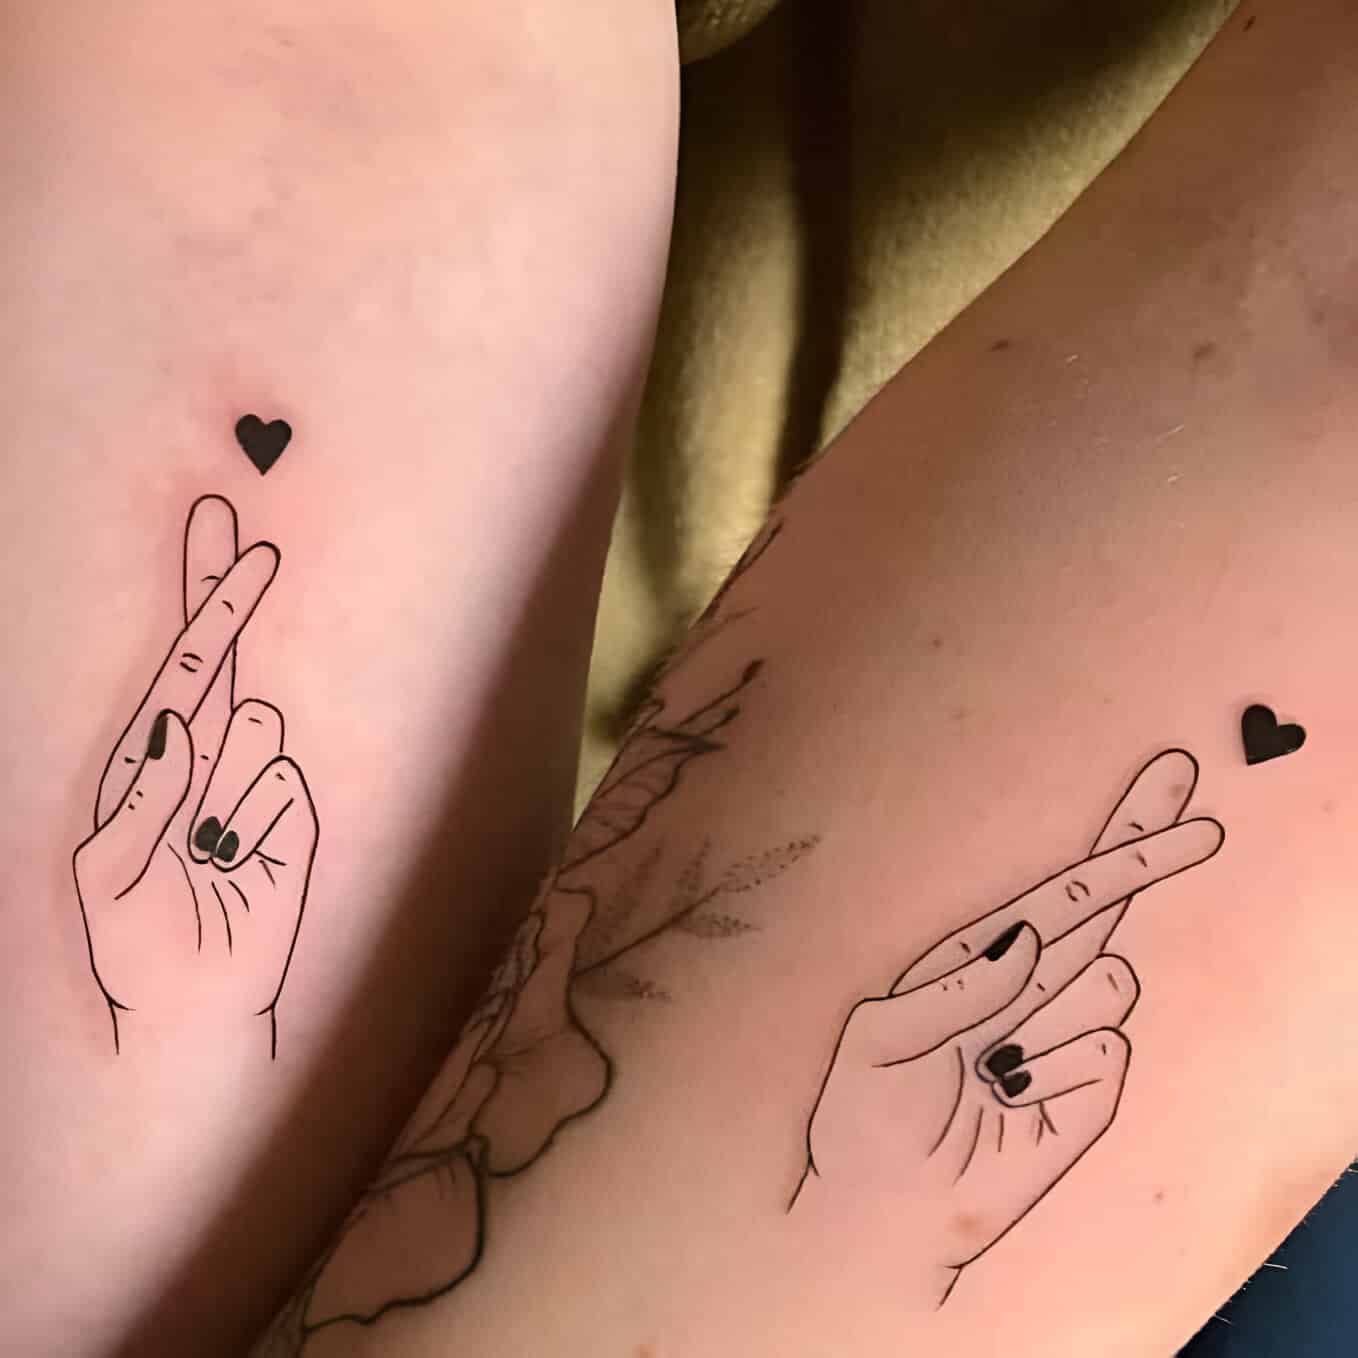 30 Elegant Matching Heart Tattoos To Get With Your Partner ASAP 2